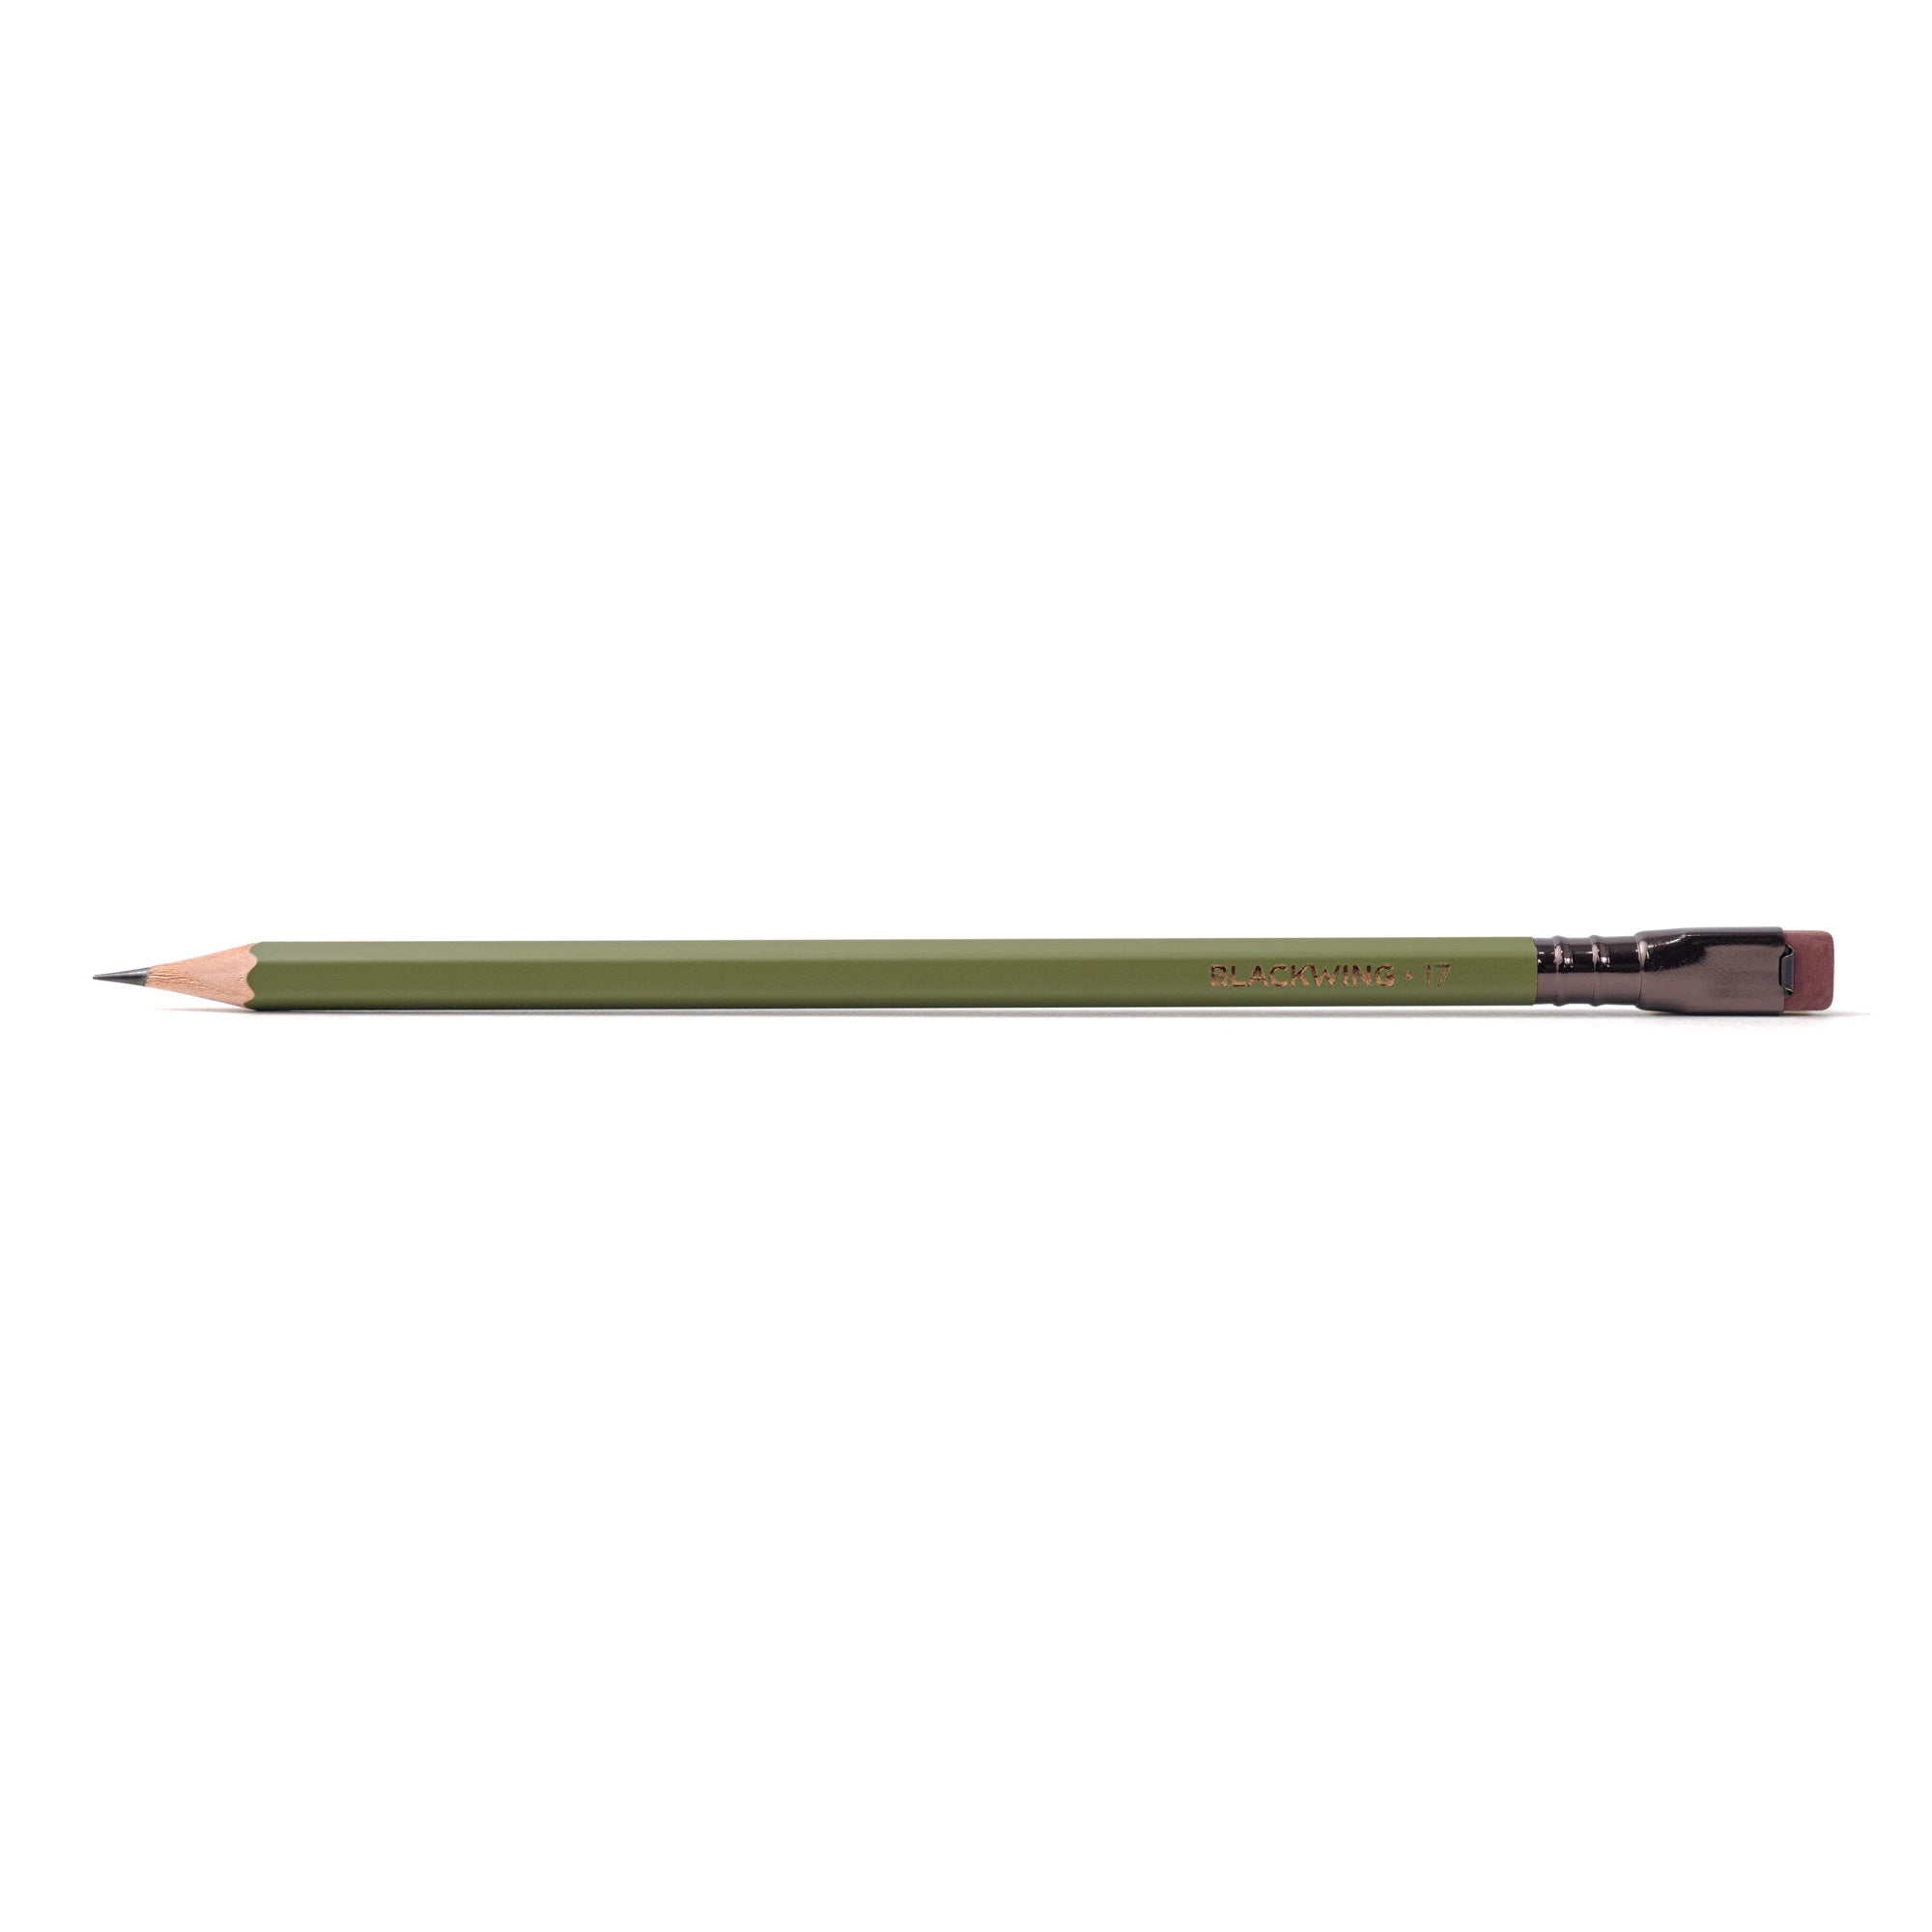 Blackwing Volume 17 limited edition